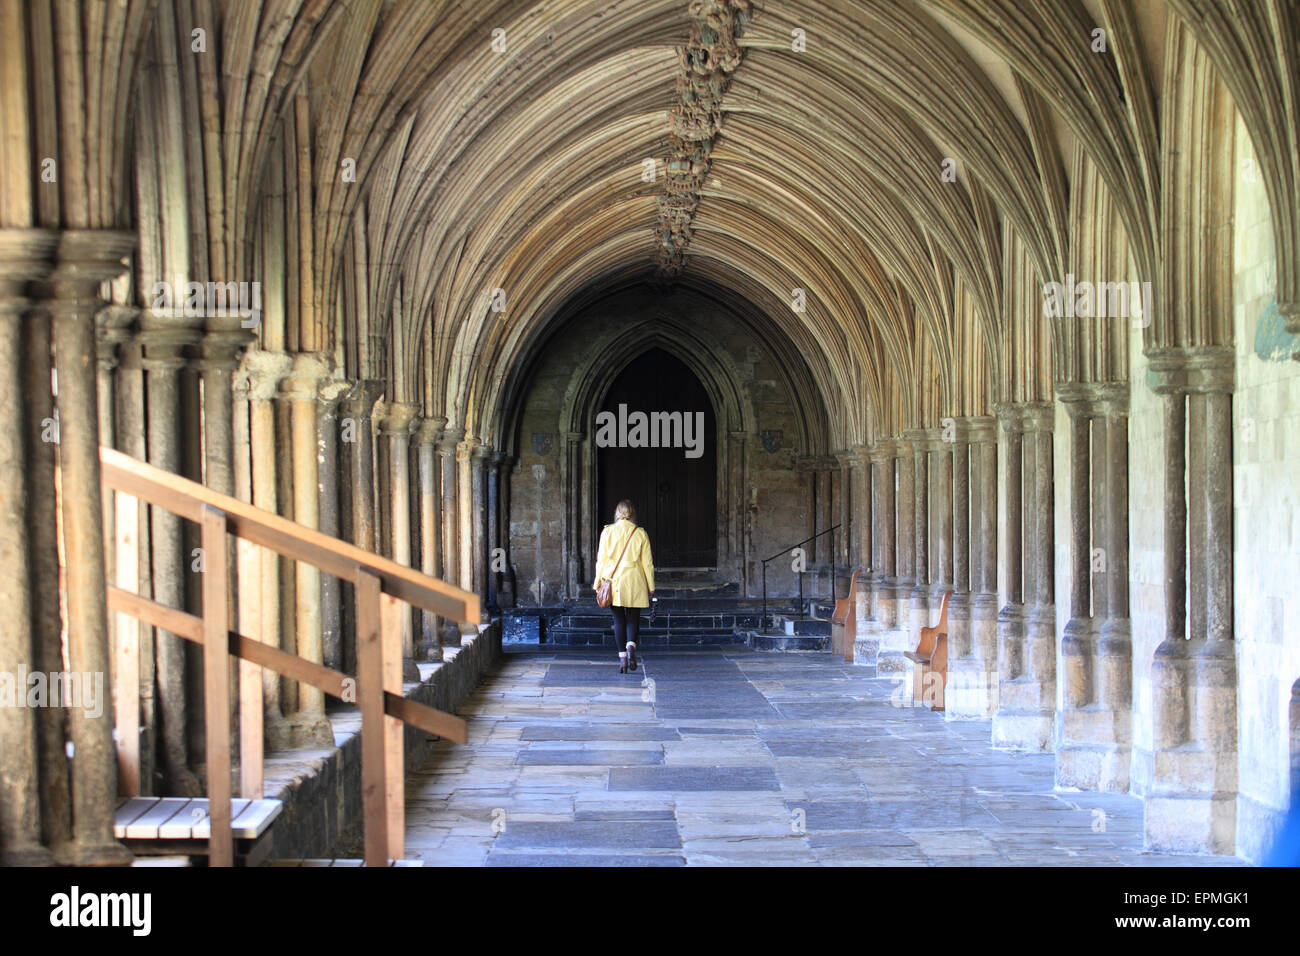 The cloisters at Norwich Cathedral, lady yellow top walking, Norwich, Norfolk, UK Stock Photo